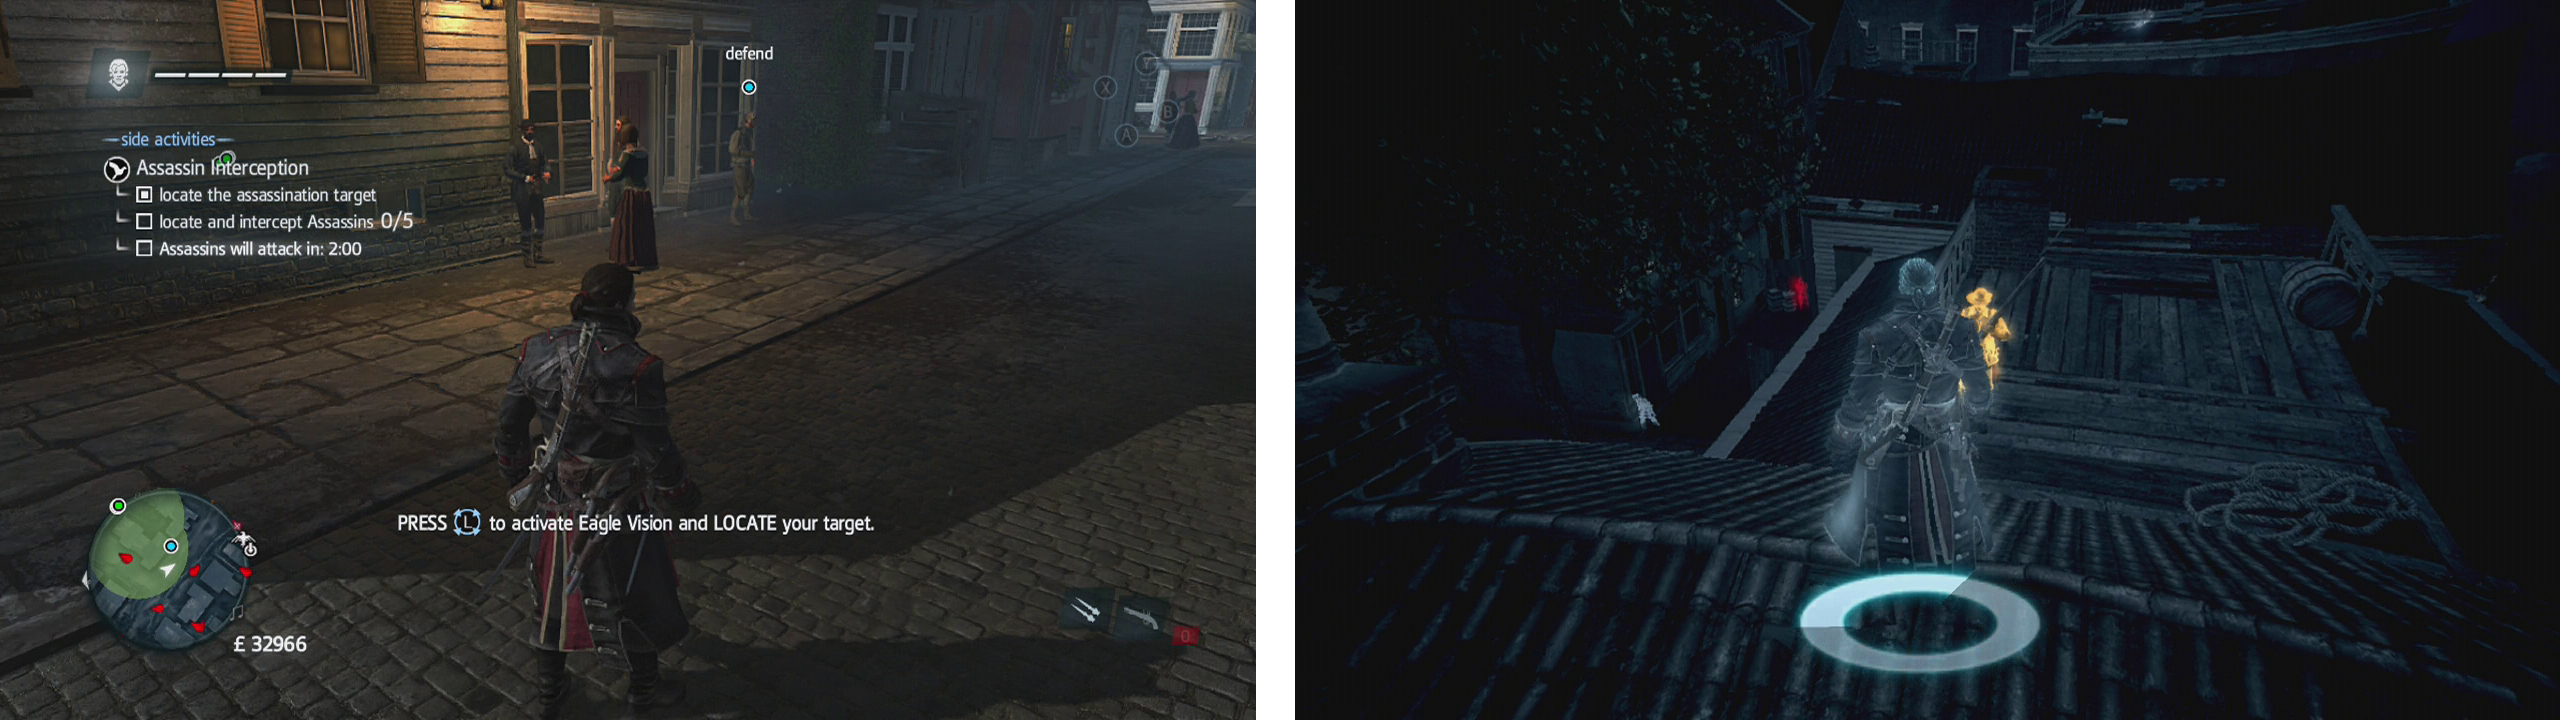 The target can be found along the main street (left). Two assassins are on the rooftops directly behind him (right).